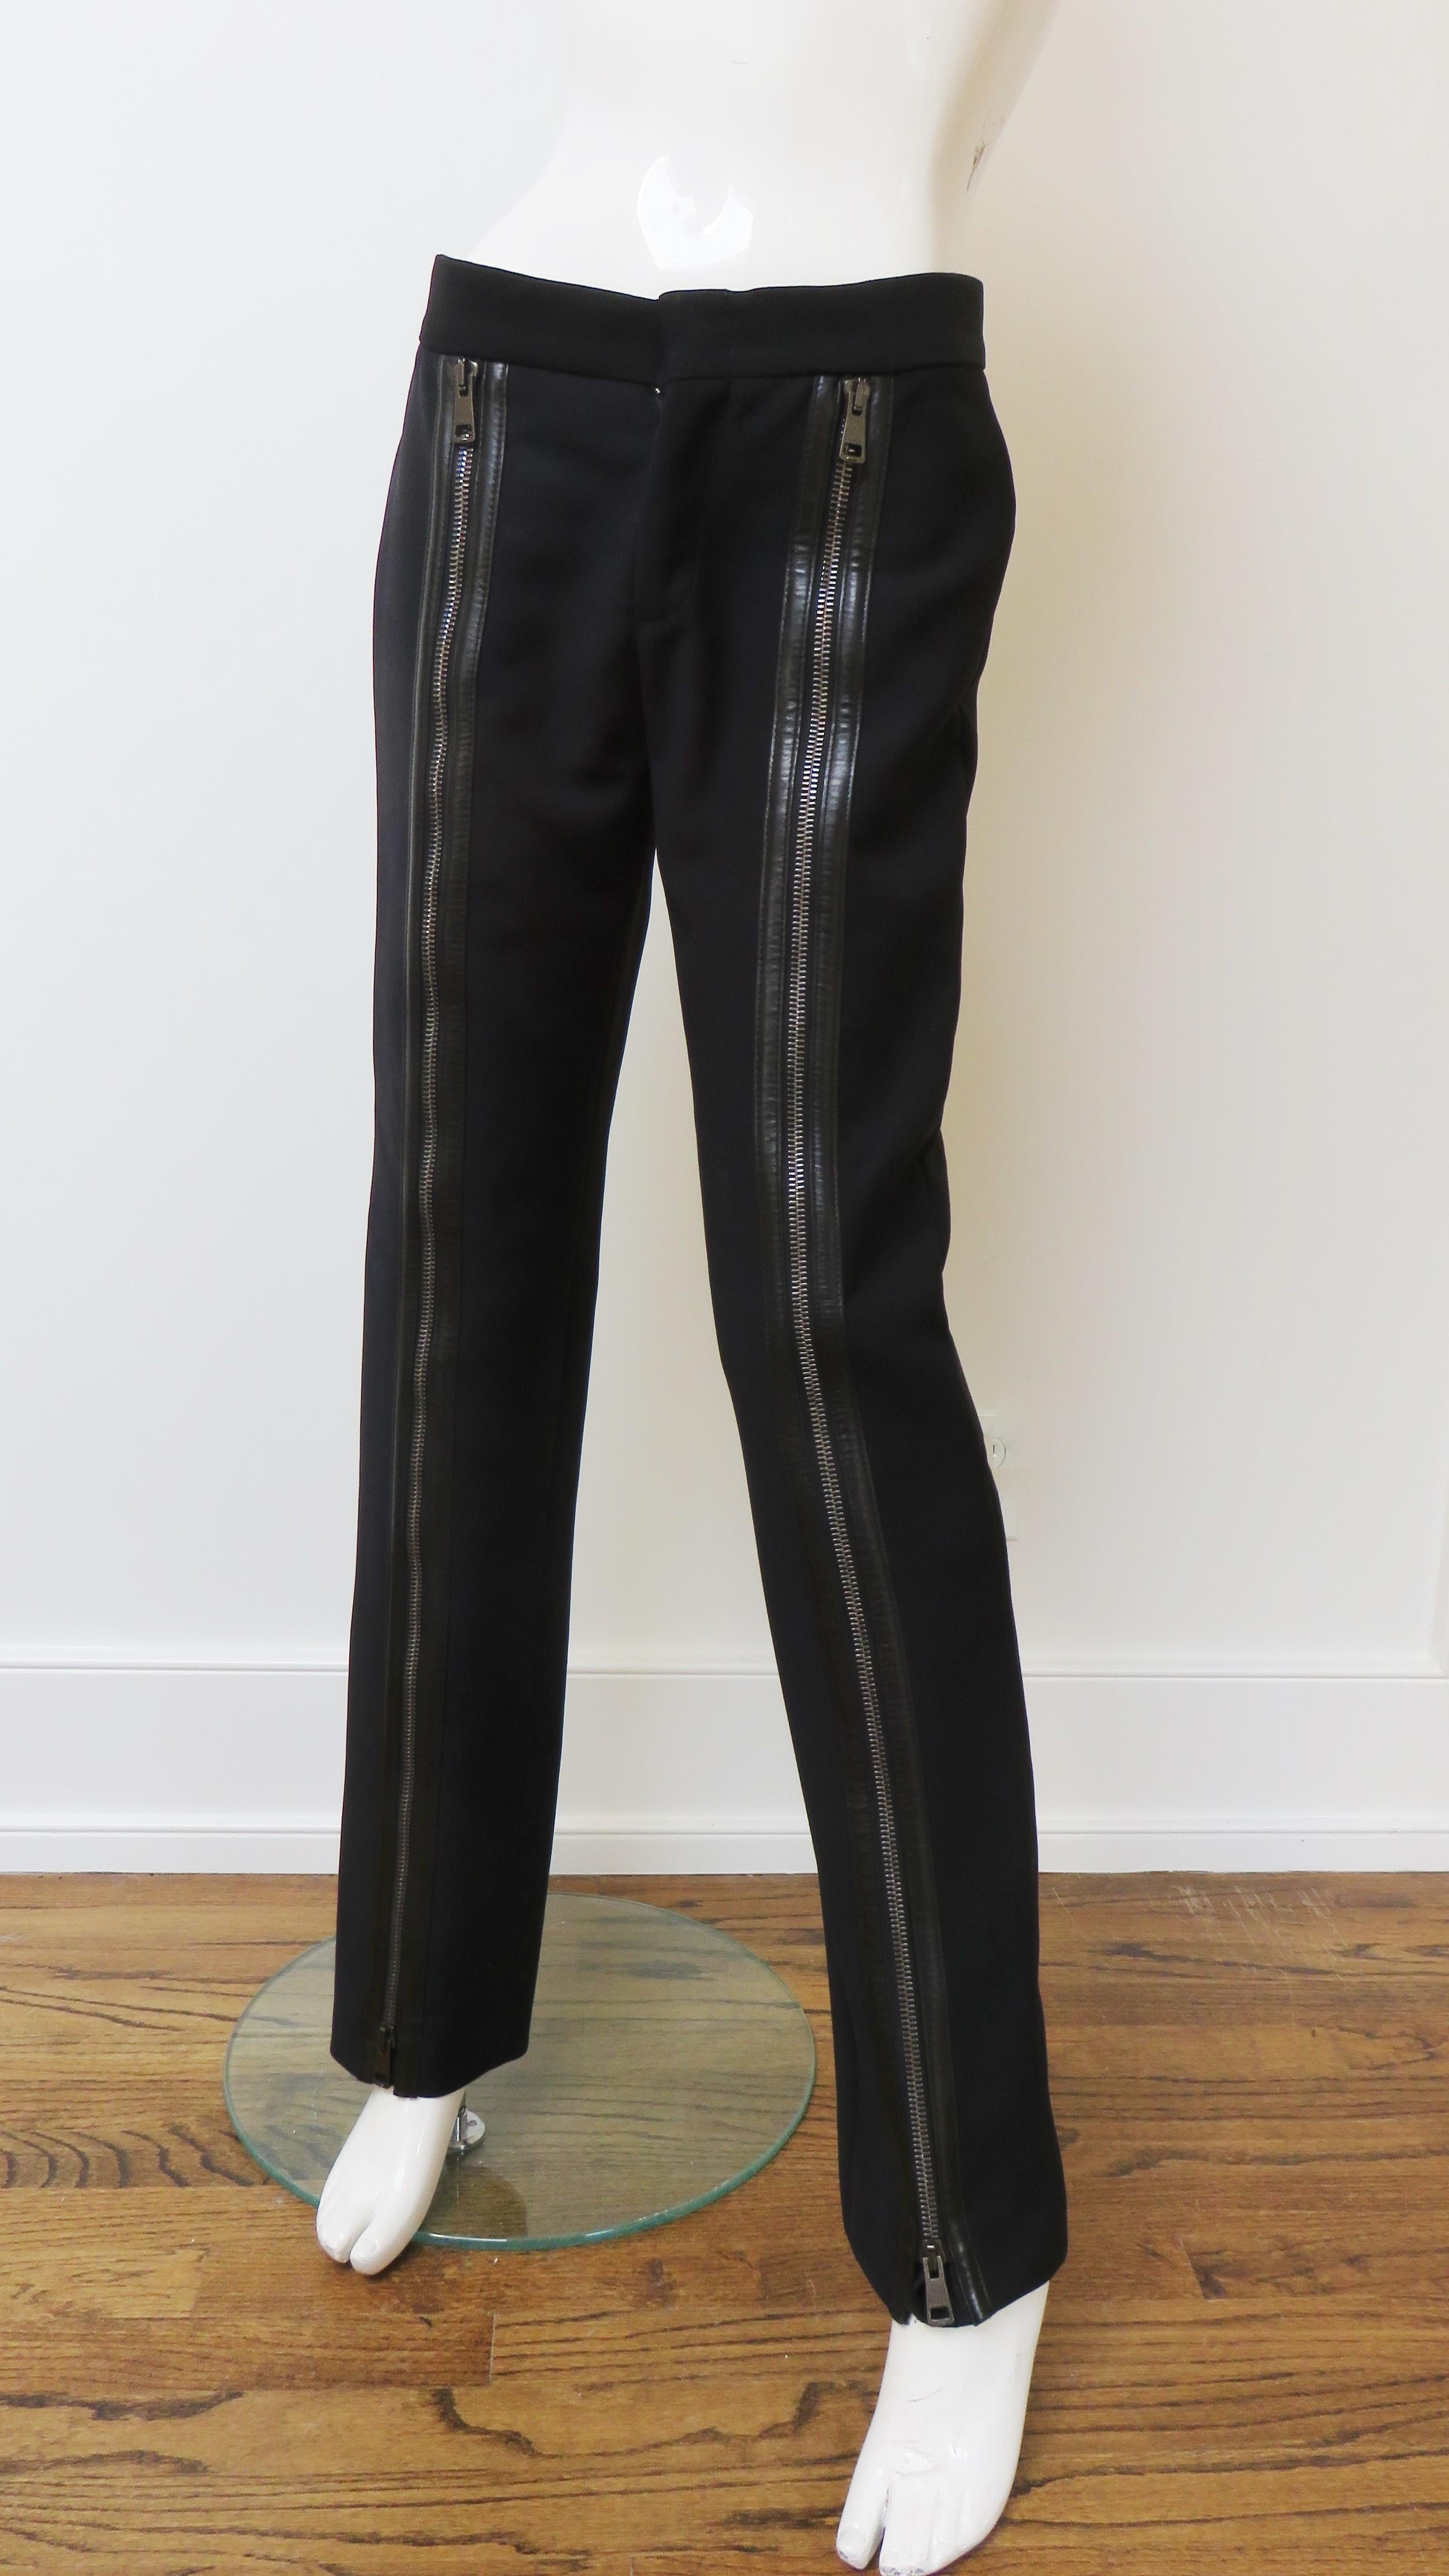 Tom Ford for Gucci Pants with Zipper Legs A/W 2001 For Sale 2